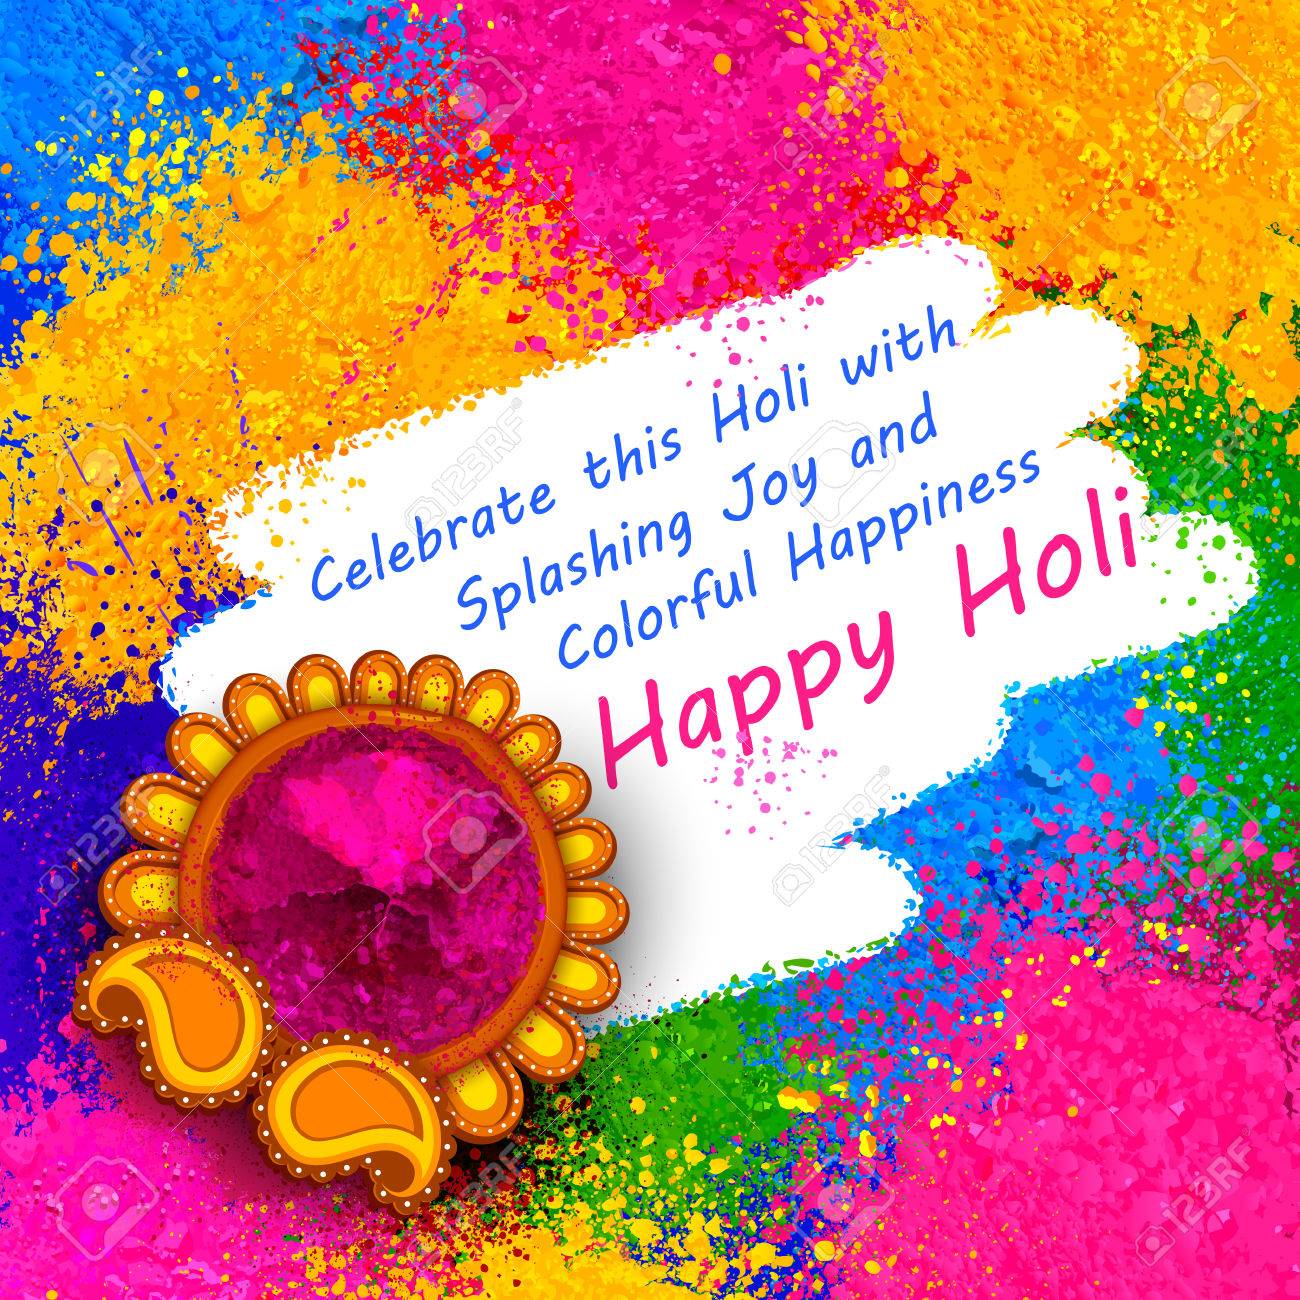 Powder Color Explosion For Happy Holi Background Royalty